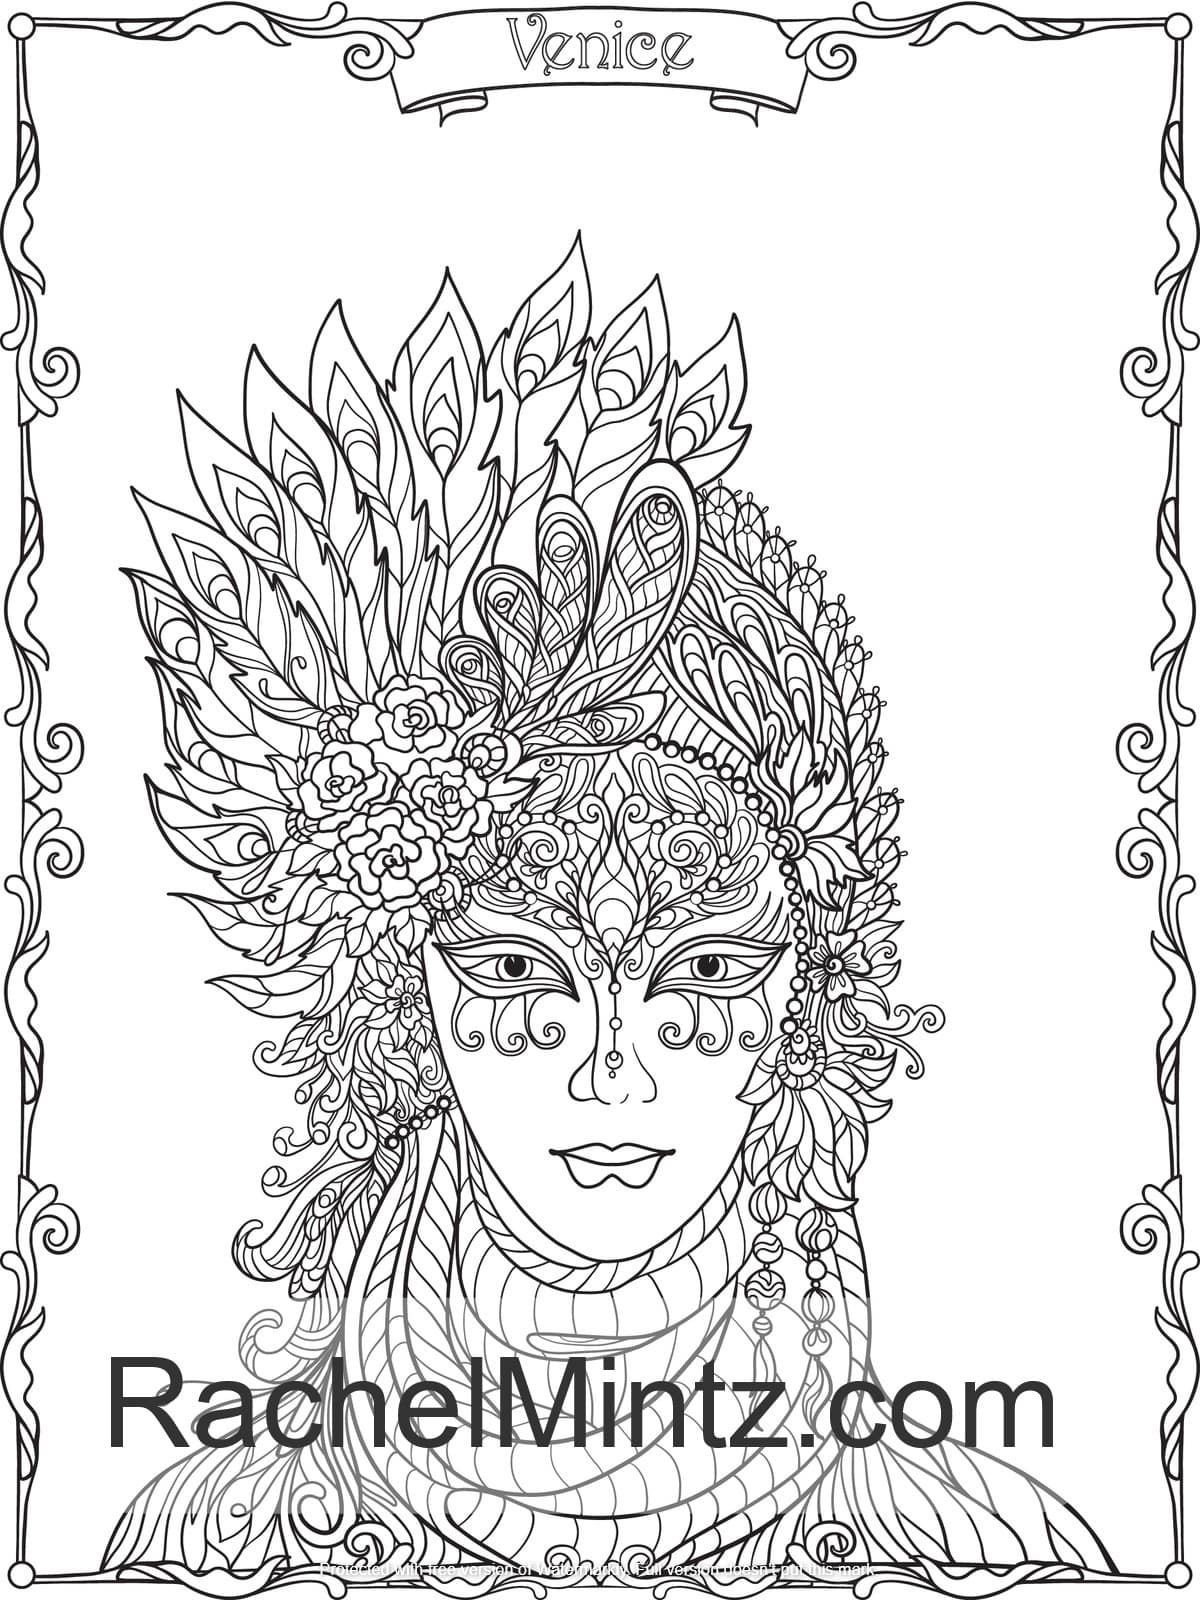 Venice Girls - Masks Coloring Book, Women in Carnival / Mardi Gras Decorated Mask Patterns (PDF Book)